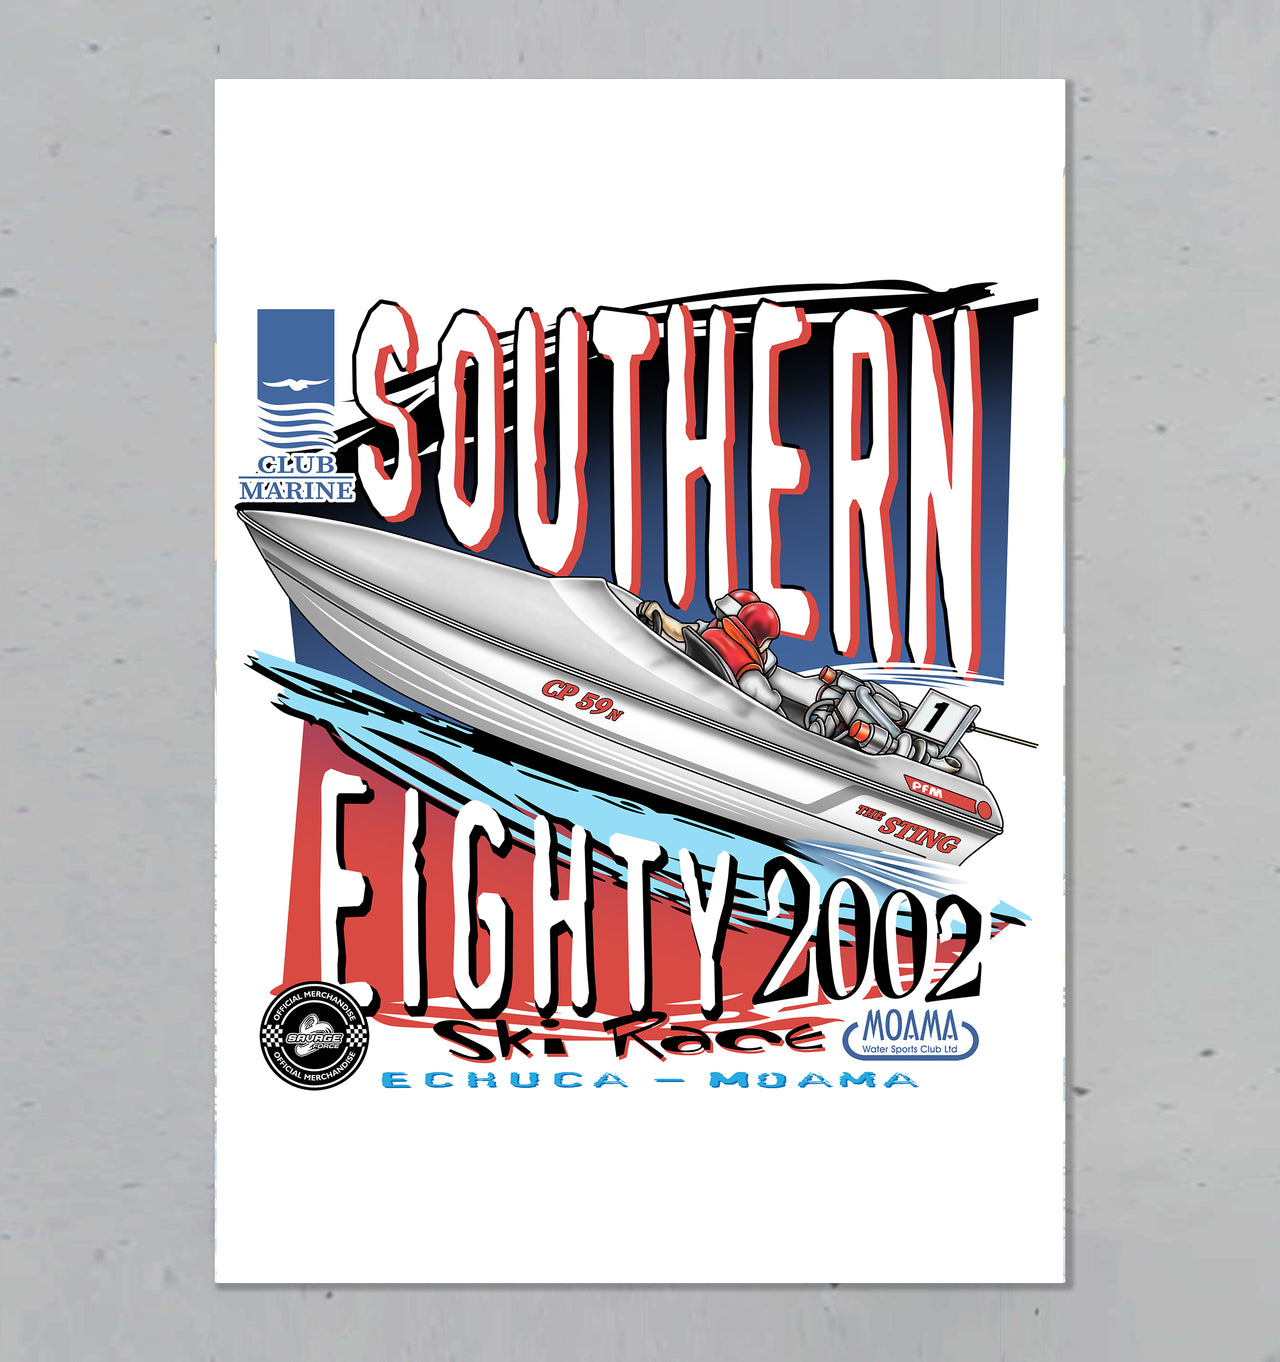 The Sting 2002 Southern 80 Poster